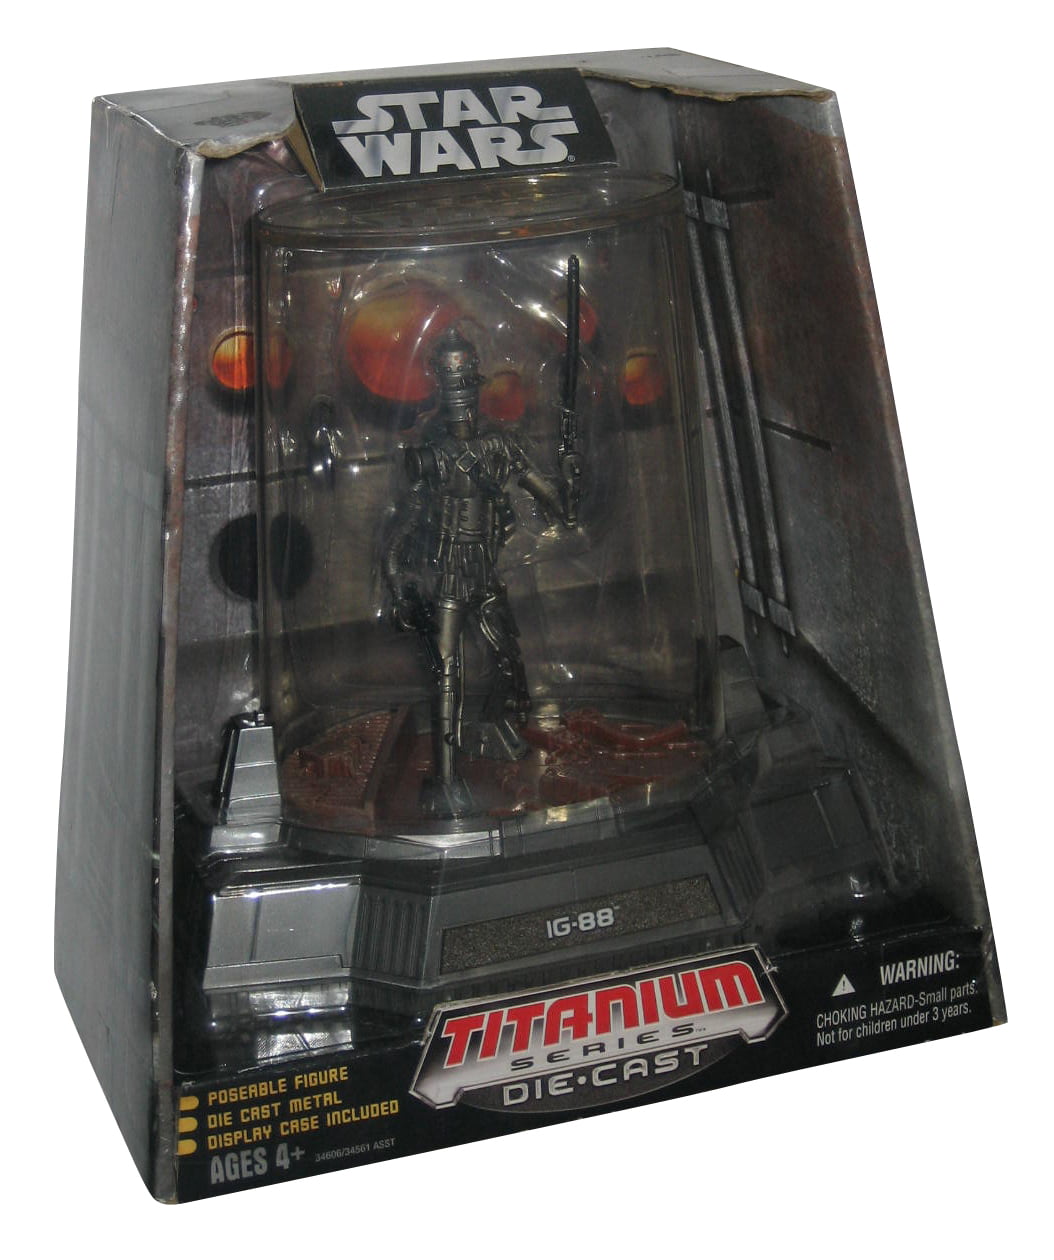 Star Wars Titanium figure IG-88 by Tommy direct